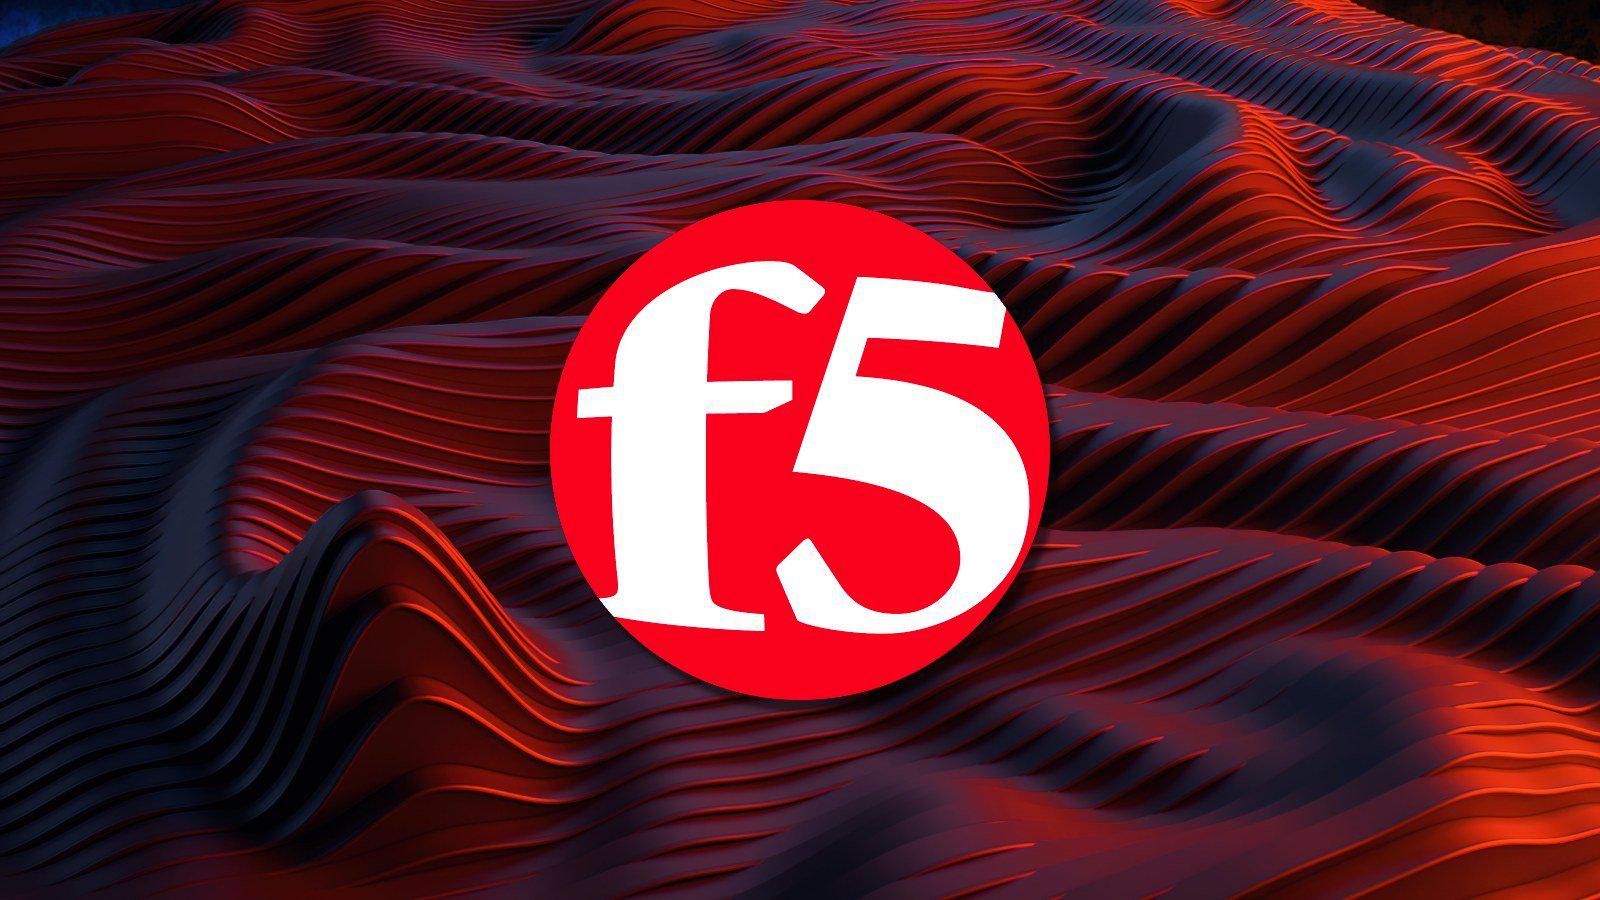 F5 fixes BIG-IP auth bypass allowing remote code execution attacks